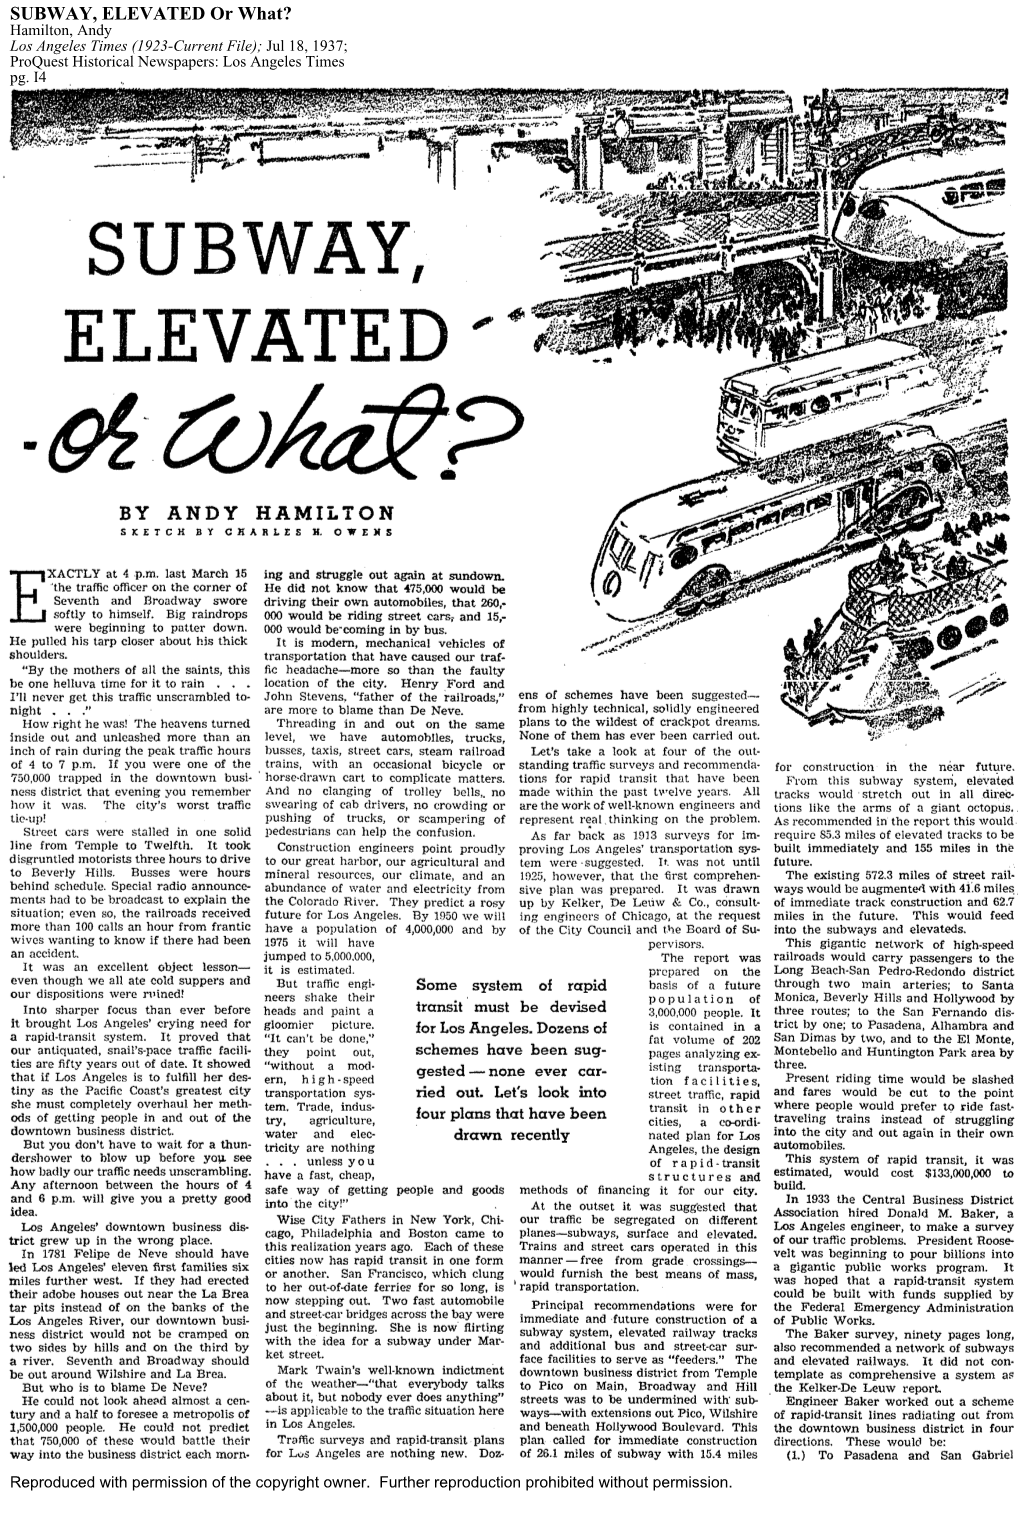 SUBWAY, ELEVATED Or What? Hamilton, Andy Los Angeles Times (1923-Current File); Jul 18, 1937; Proquest Historical Newspapers: Los Angeles Times Pg